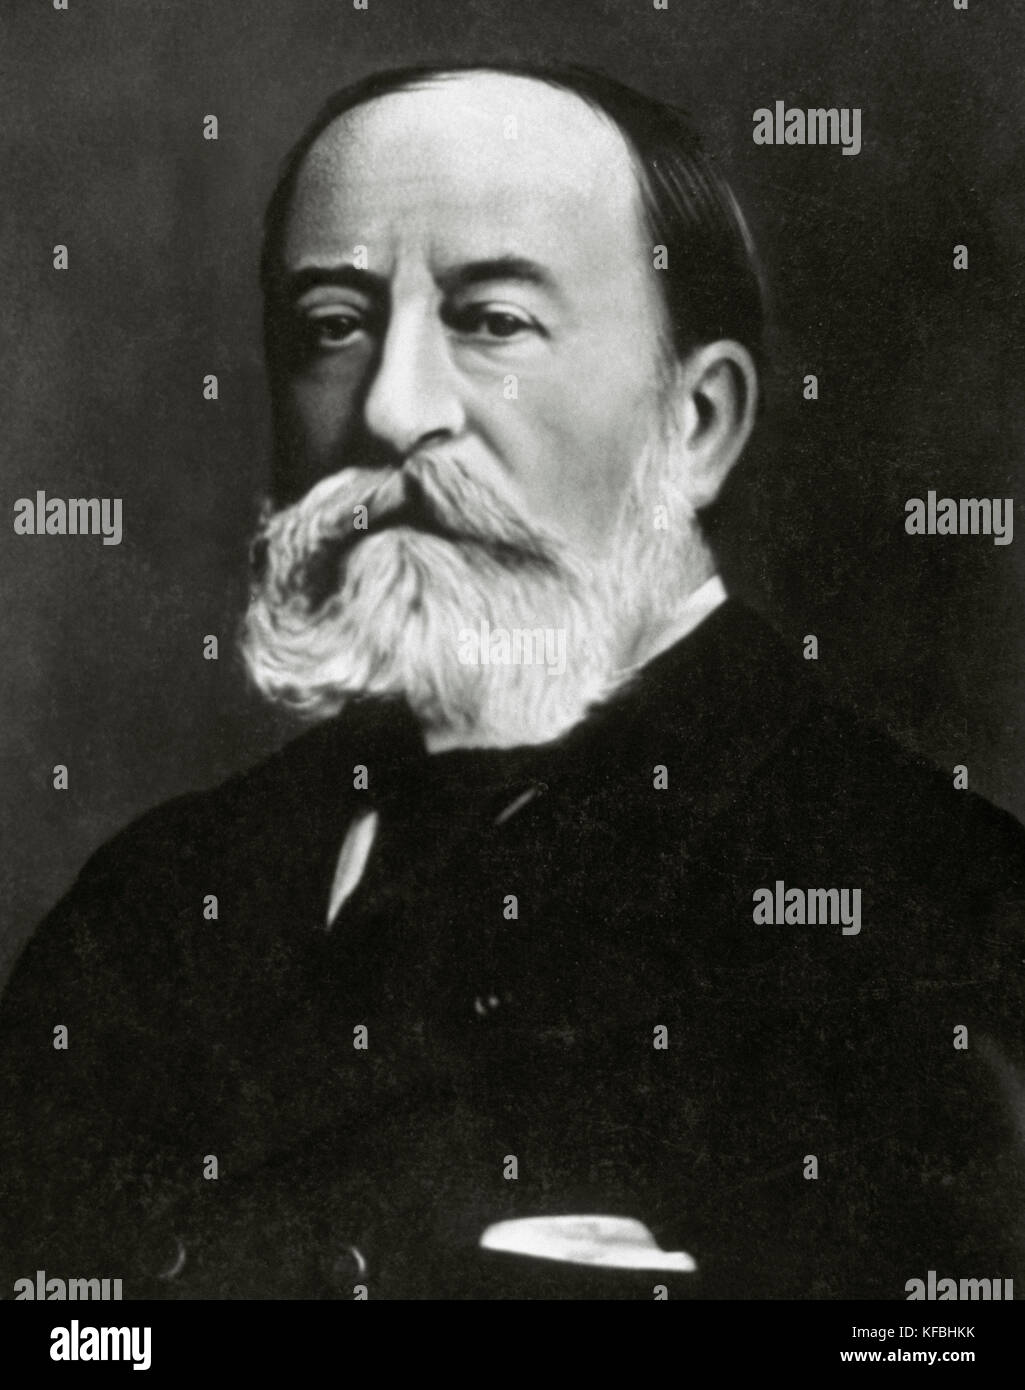 Camille Saint-Saens (1835-1921). French composer, organist, conductor and pianist. Romantic era. Portrait. Photography. Stock Photo